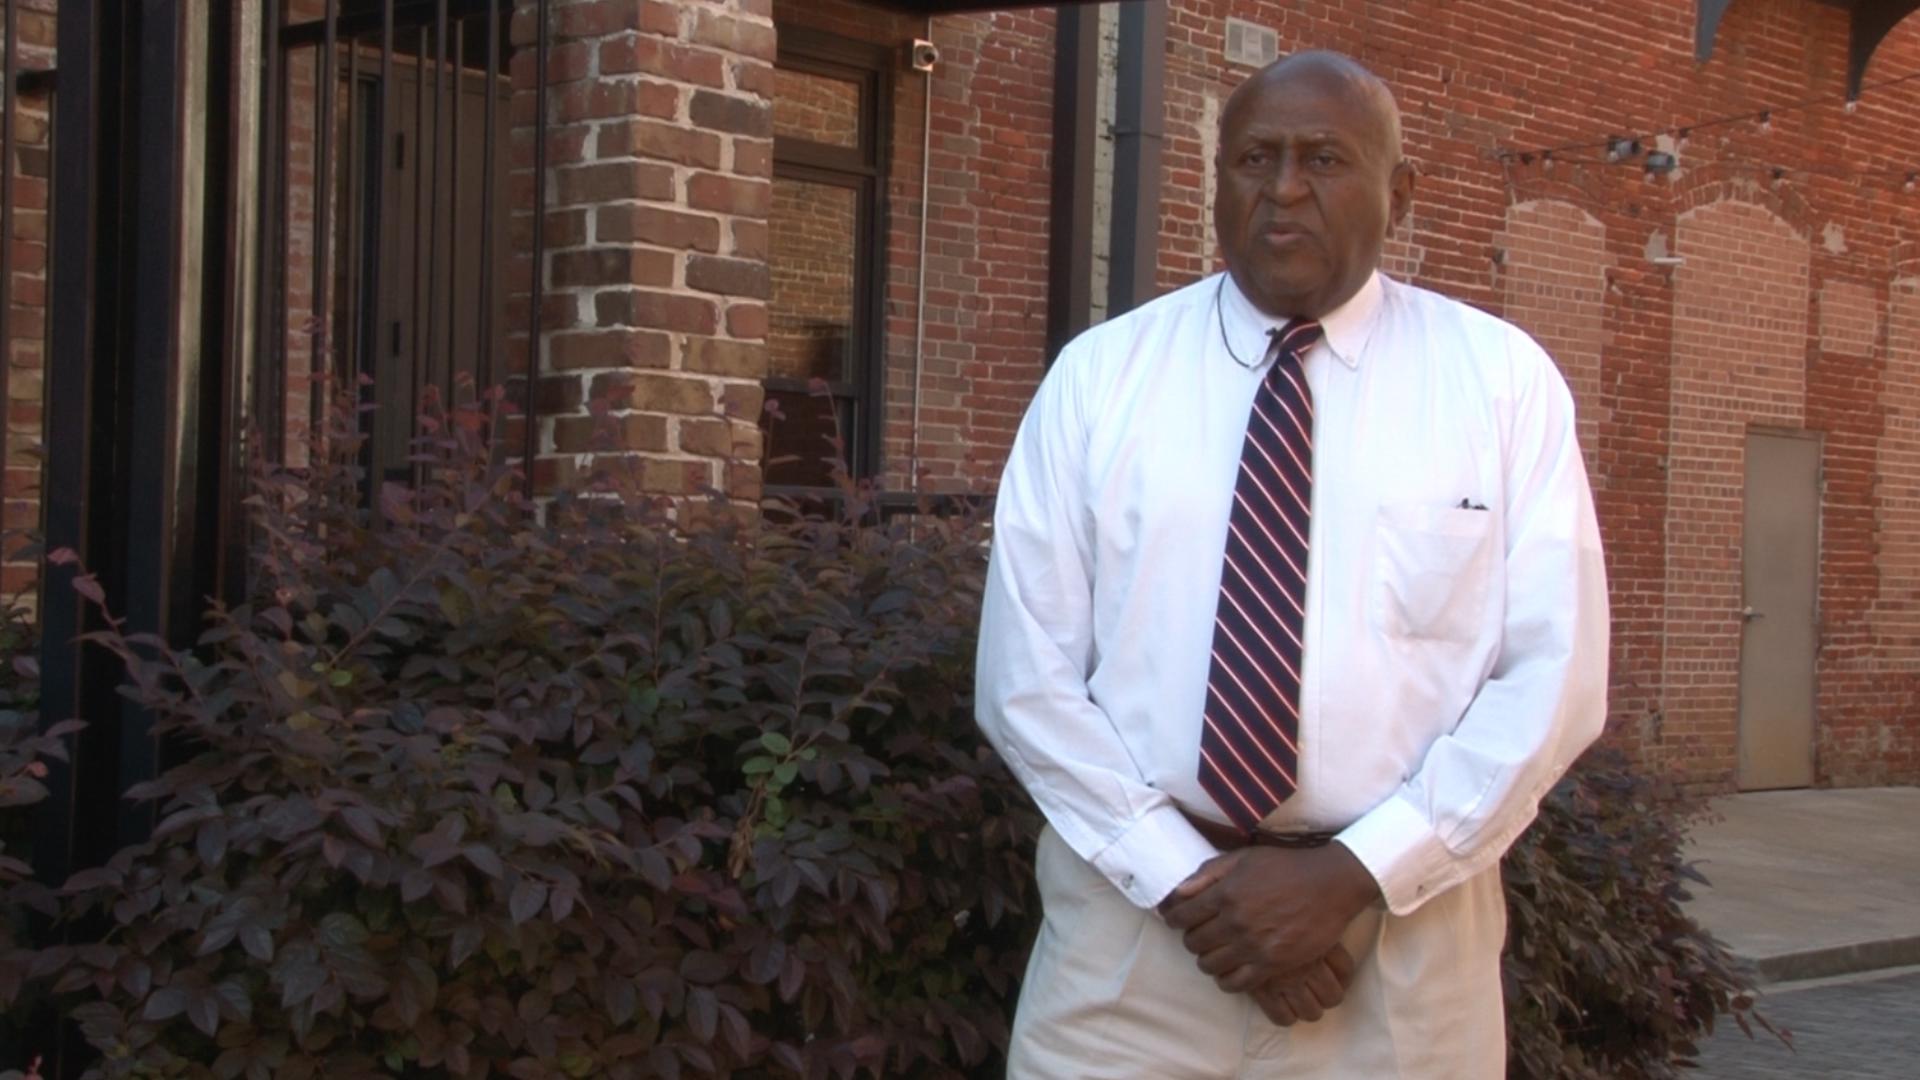 Harold McLendon has five children, and was born and raised in Laurens County.